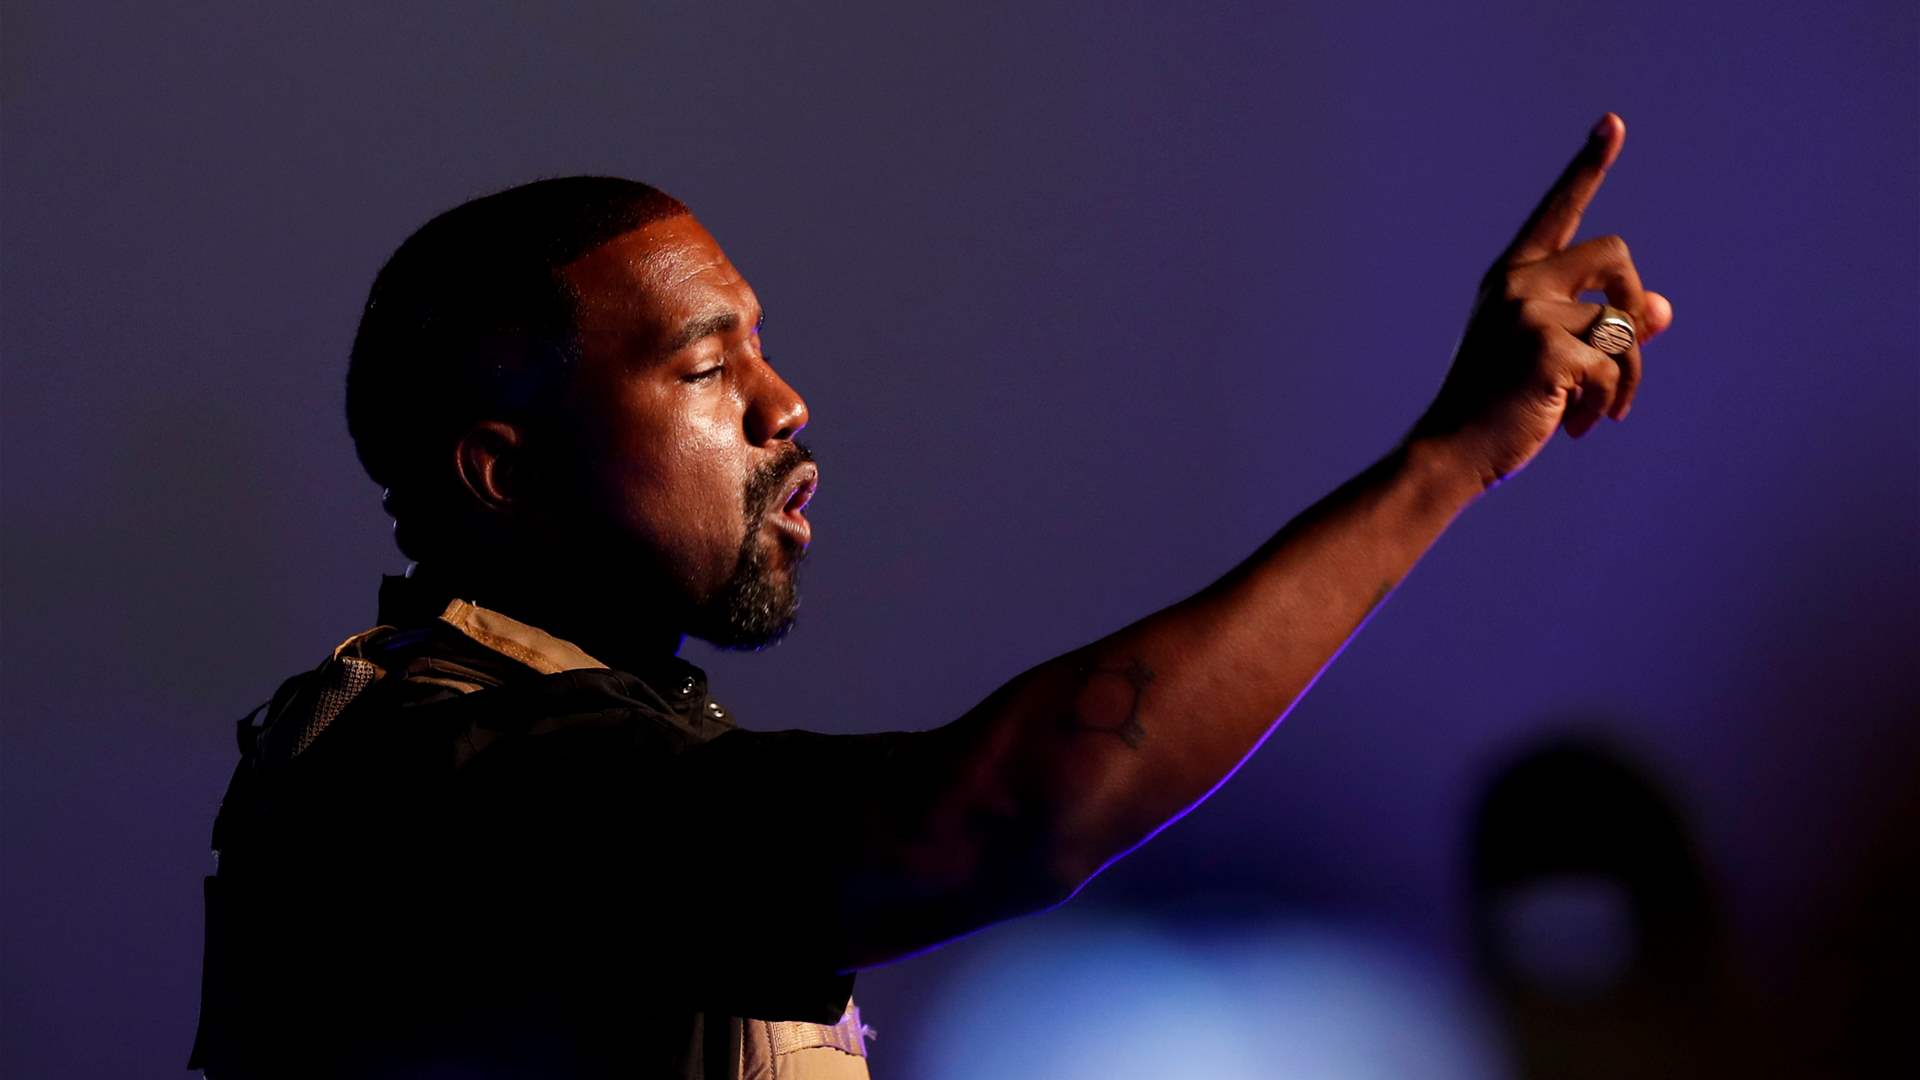 &quot;X&quot; previously known as Twitter is restarting Kanye West&#39;s account